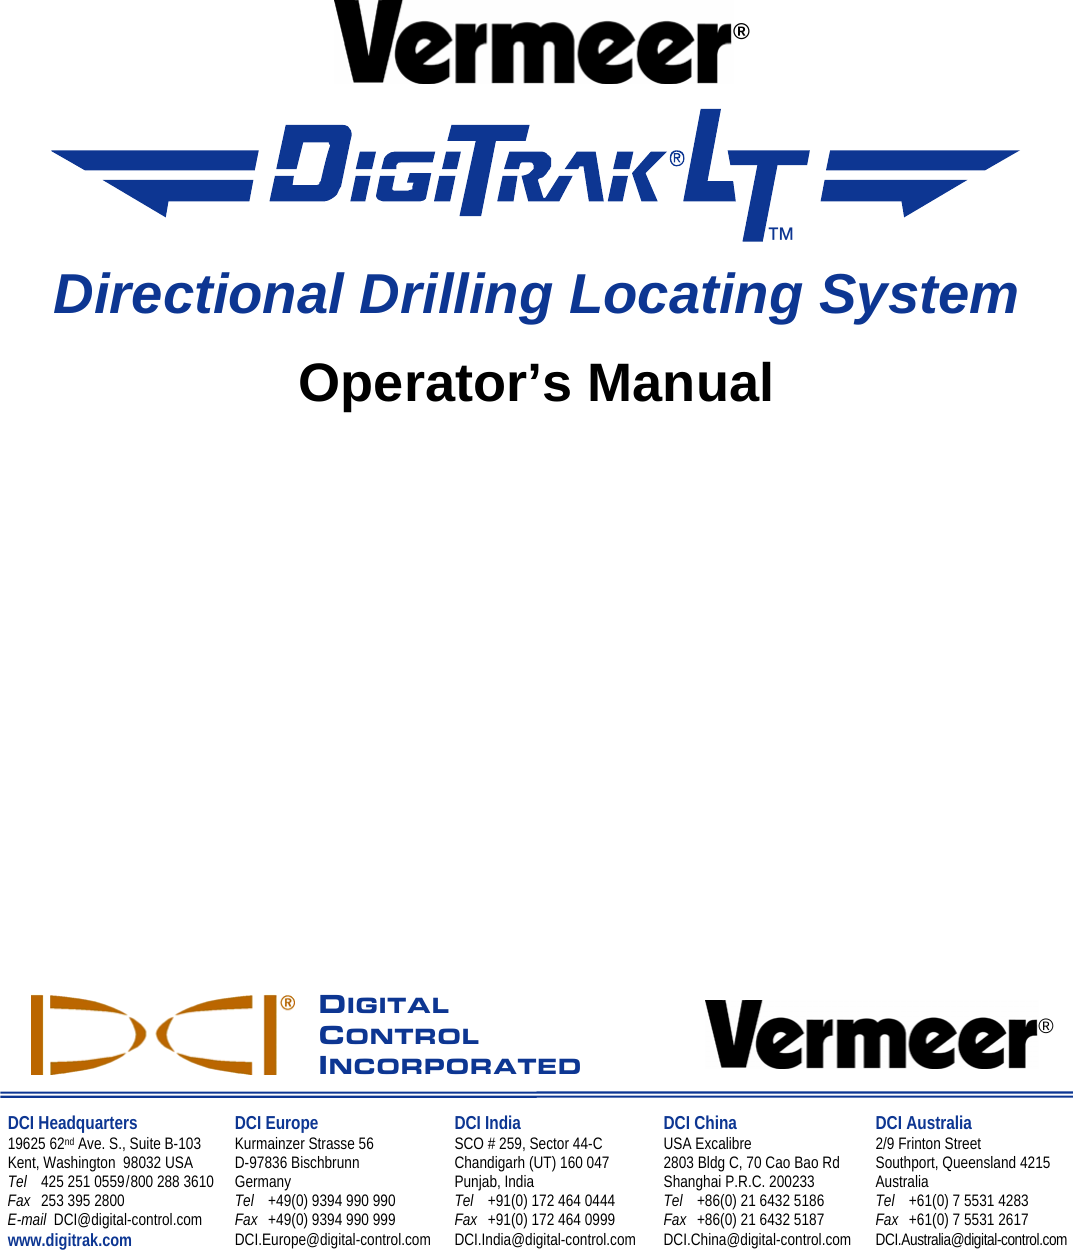            ®  ™ Directional Drilling Locating System Operator’s Manual                       DIGITAL CONTROL INCORPORATED ®    DCI Headquarters 19625 62nd Ave. S., Suite B-103 Kent, Washington  98032 USA Tel  425 251 0559 / 800 288 3610 Fax  253 395 2800 E-mail  DCI@digital-control.com Hwww.digitrak.comH  DCI Europe Kurmainzer Strasse 56 D-97836 Bischbrunn  Germany Tel  +49(0) 9394 990 990 Fax  +49(0) 9394 990 999 DCI.Europe@digital-control.com DCI India SCO # 259, Sector 44-C Chandigarh (UT) 160 047 Punjab, India Tel  +91(0) 172 464 0444 Fax  +91(0) 172 464 0999 DCI.India@digital-control.com DCI China USA Excalibre  2803 Bldg C, 70 Cao Bao Rd Shanghai P.R.C. 200233  Tel  +86(0) 21 6432 5186 Fax  +86(0) 21 6432 5187 DCI.China@digital-control.com DCI Australia 2/9 Frinton Street Southport, Queensland 4215 Australia Tel  +61(0) 7 5531 4283 Fax  +61(0) 7 5531 2617 DCI.Australia@digital-control.com  